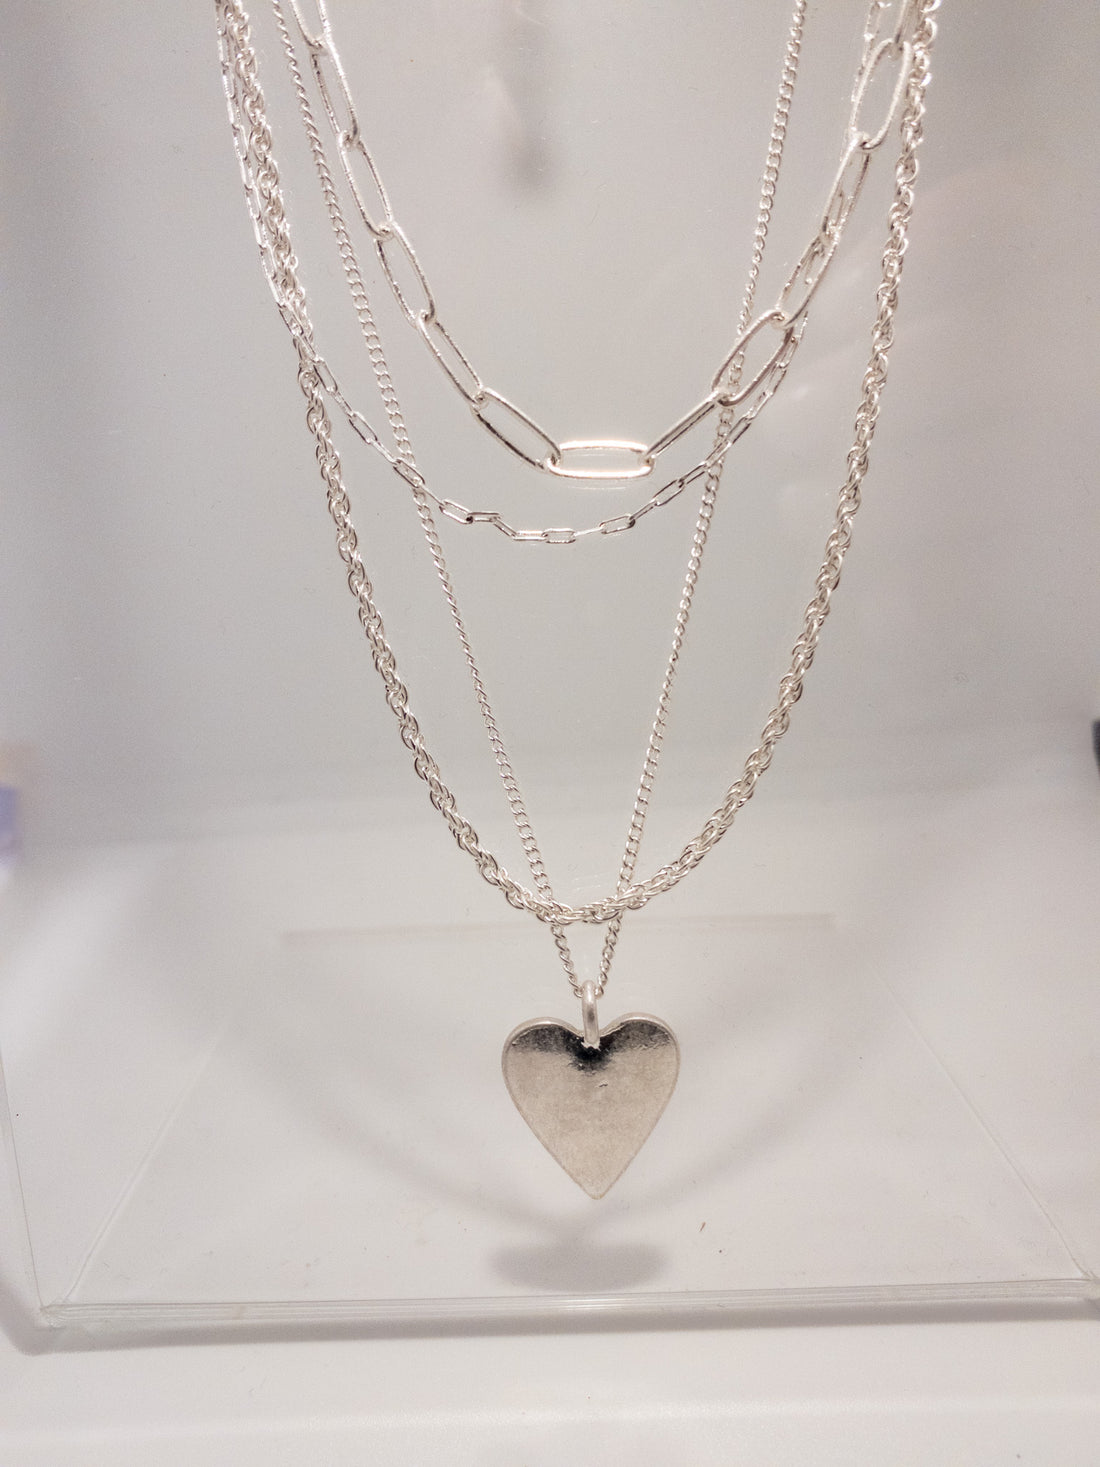 4 layer links and heart pendant